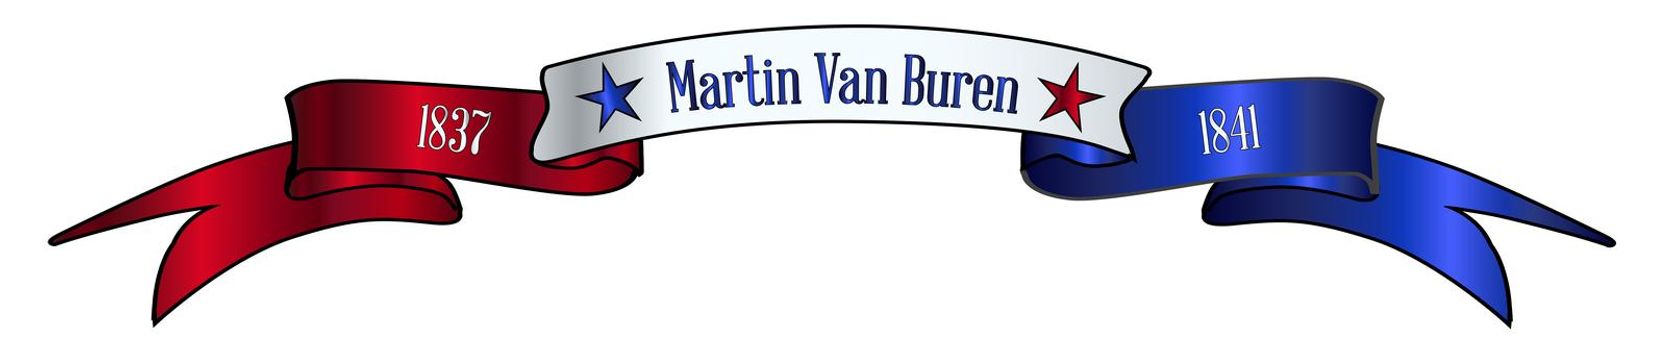 A red white and blue satin or silk ribbon banner with the text Martin Van Buren and stars and date in office